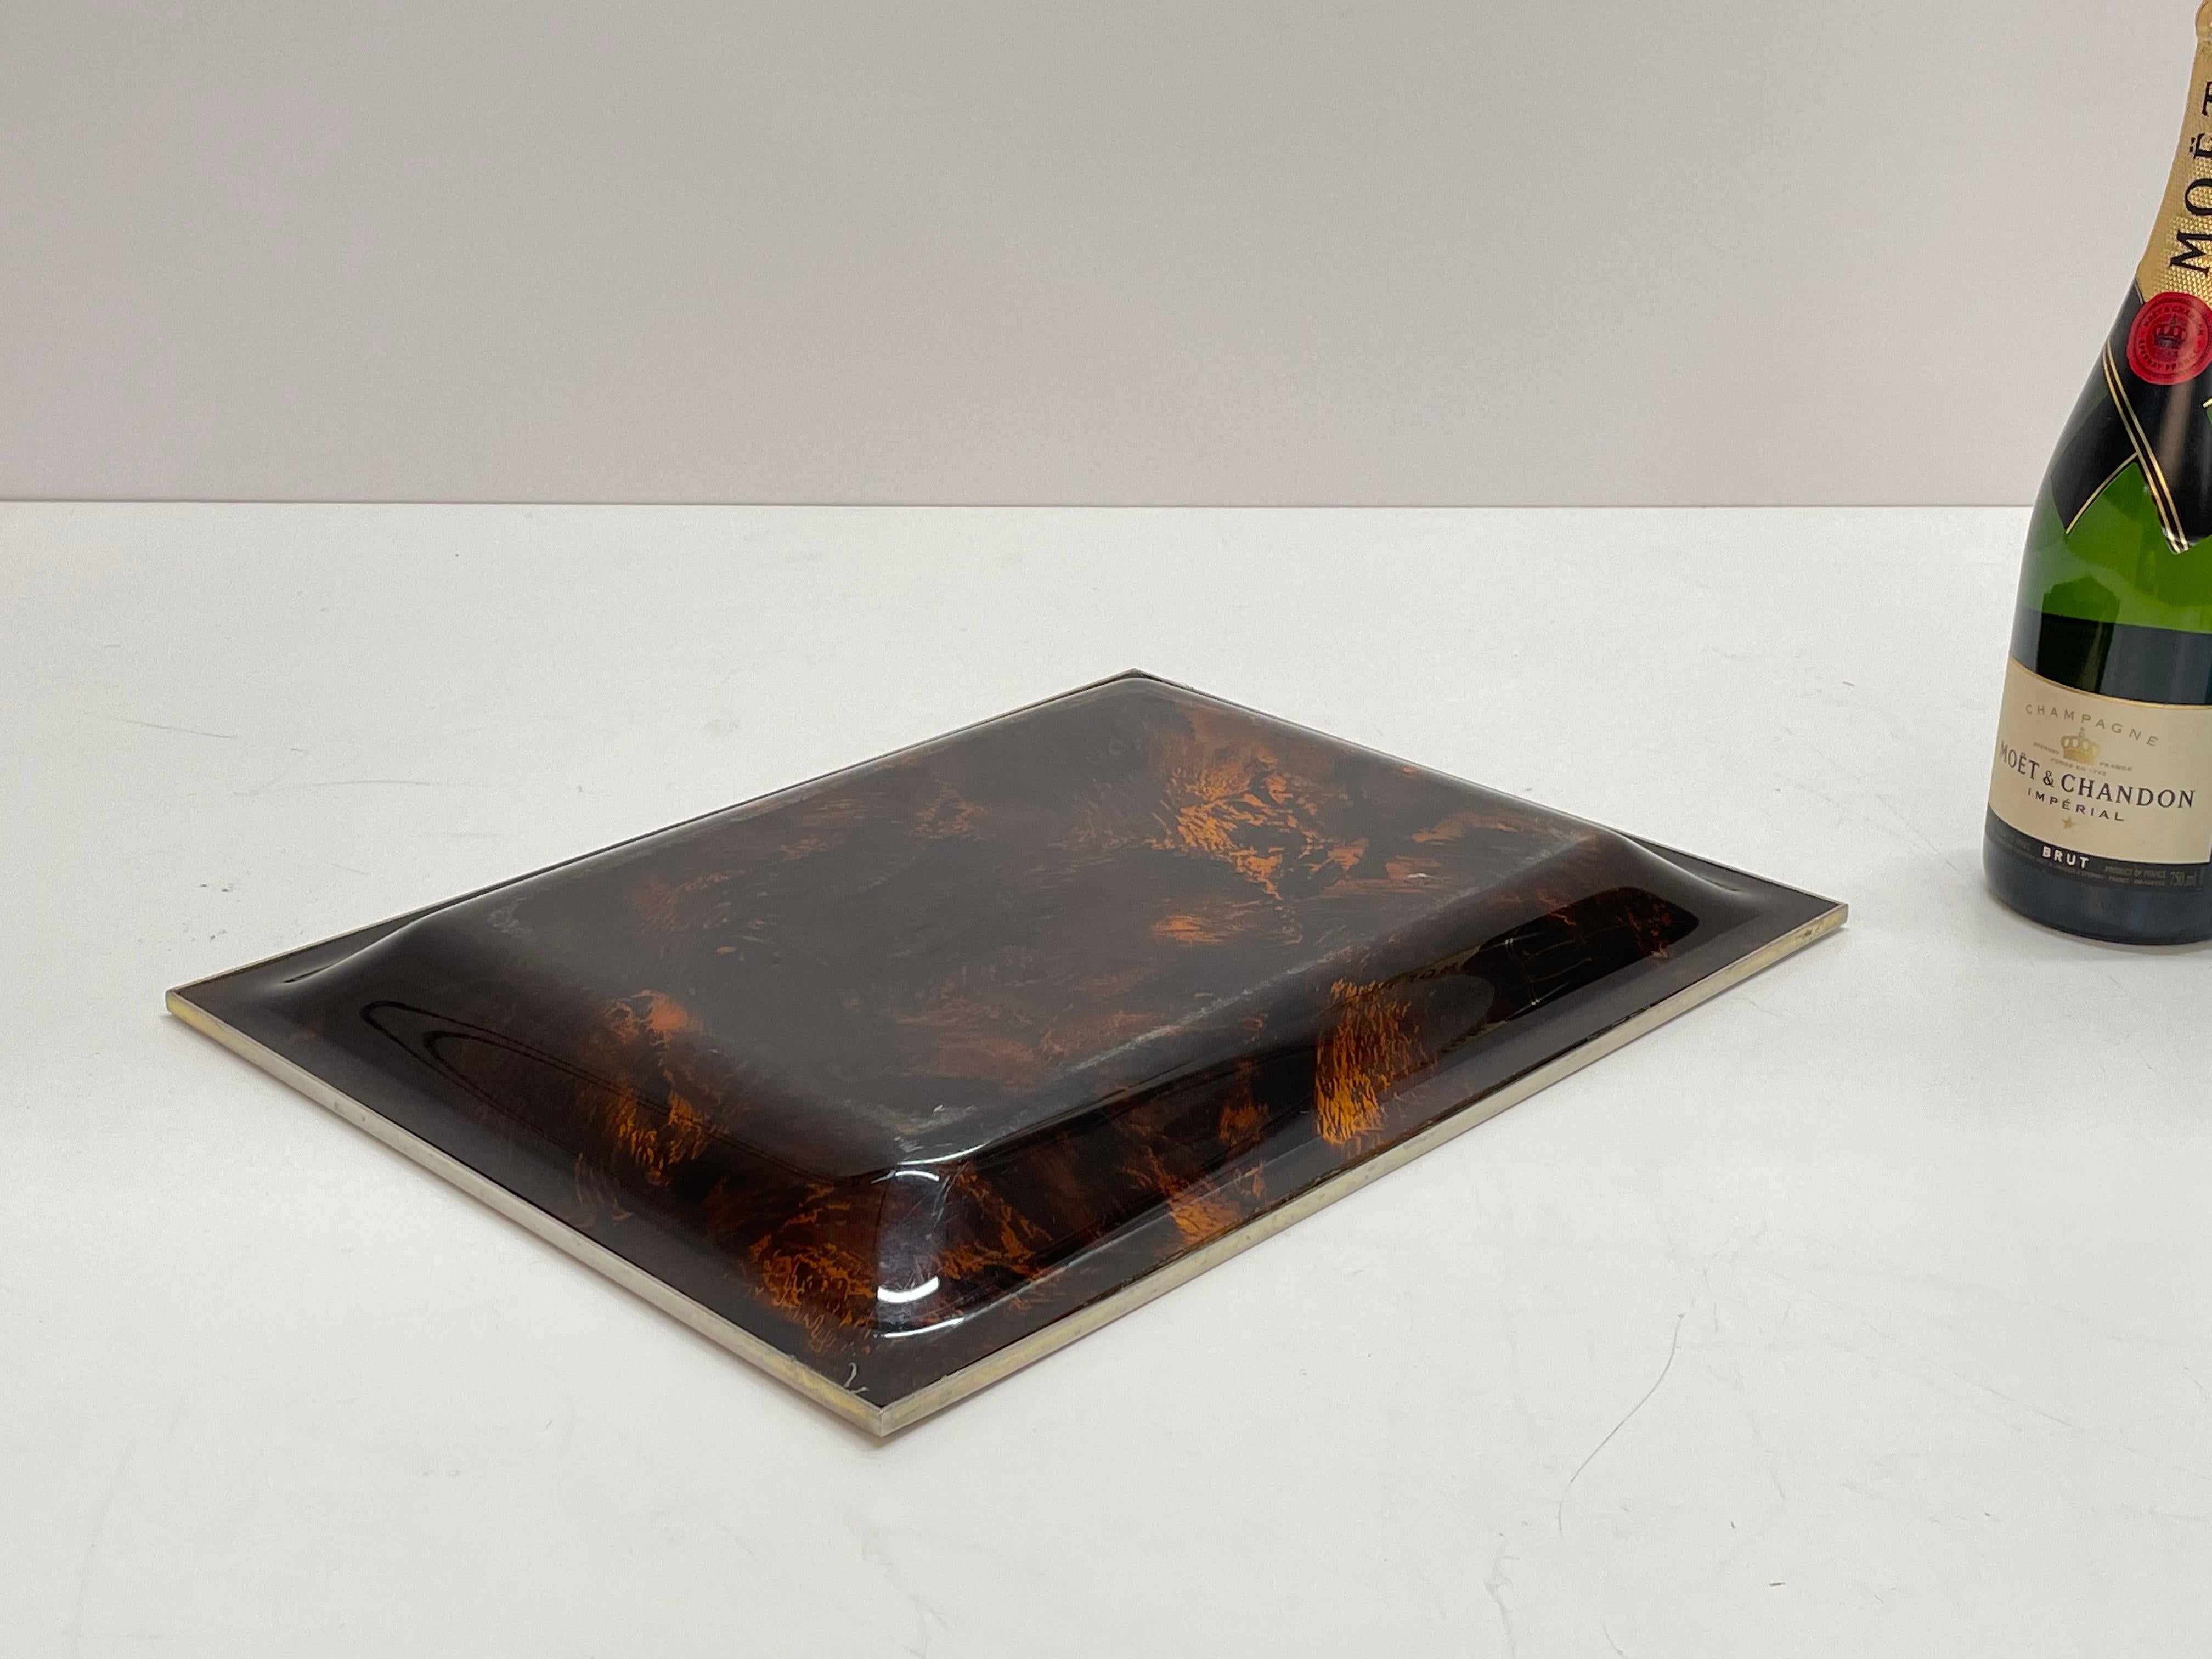 Midcentury Tortoiseshell Plexiglass Italian Serving Tray after Willy Rizzo 1970s For Sale 7